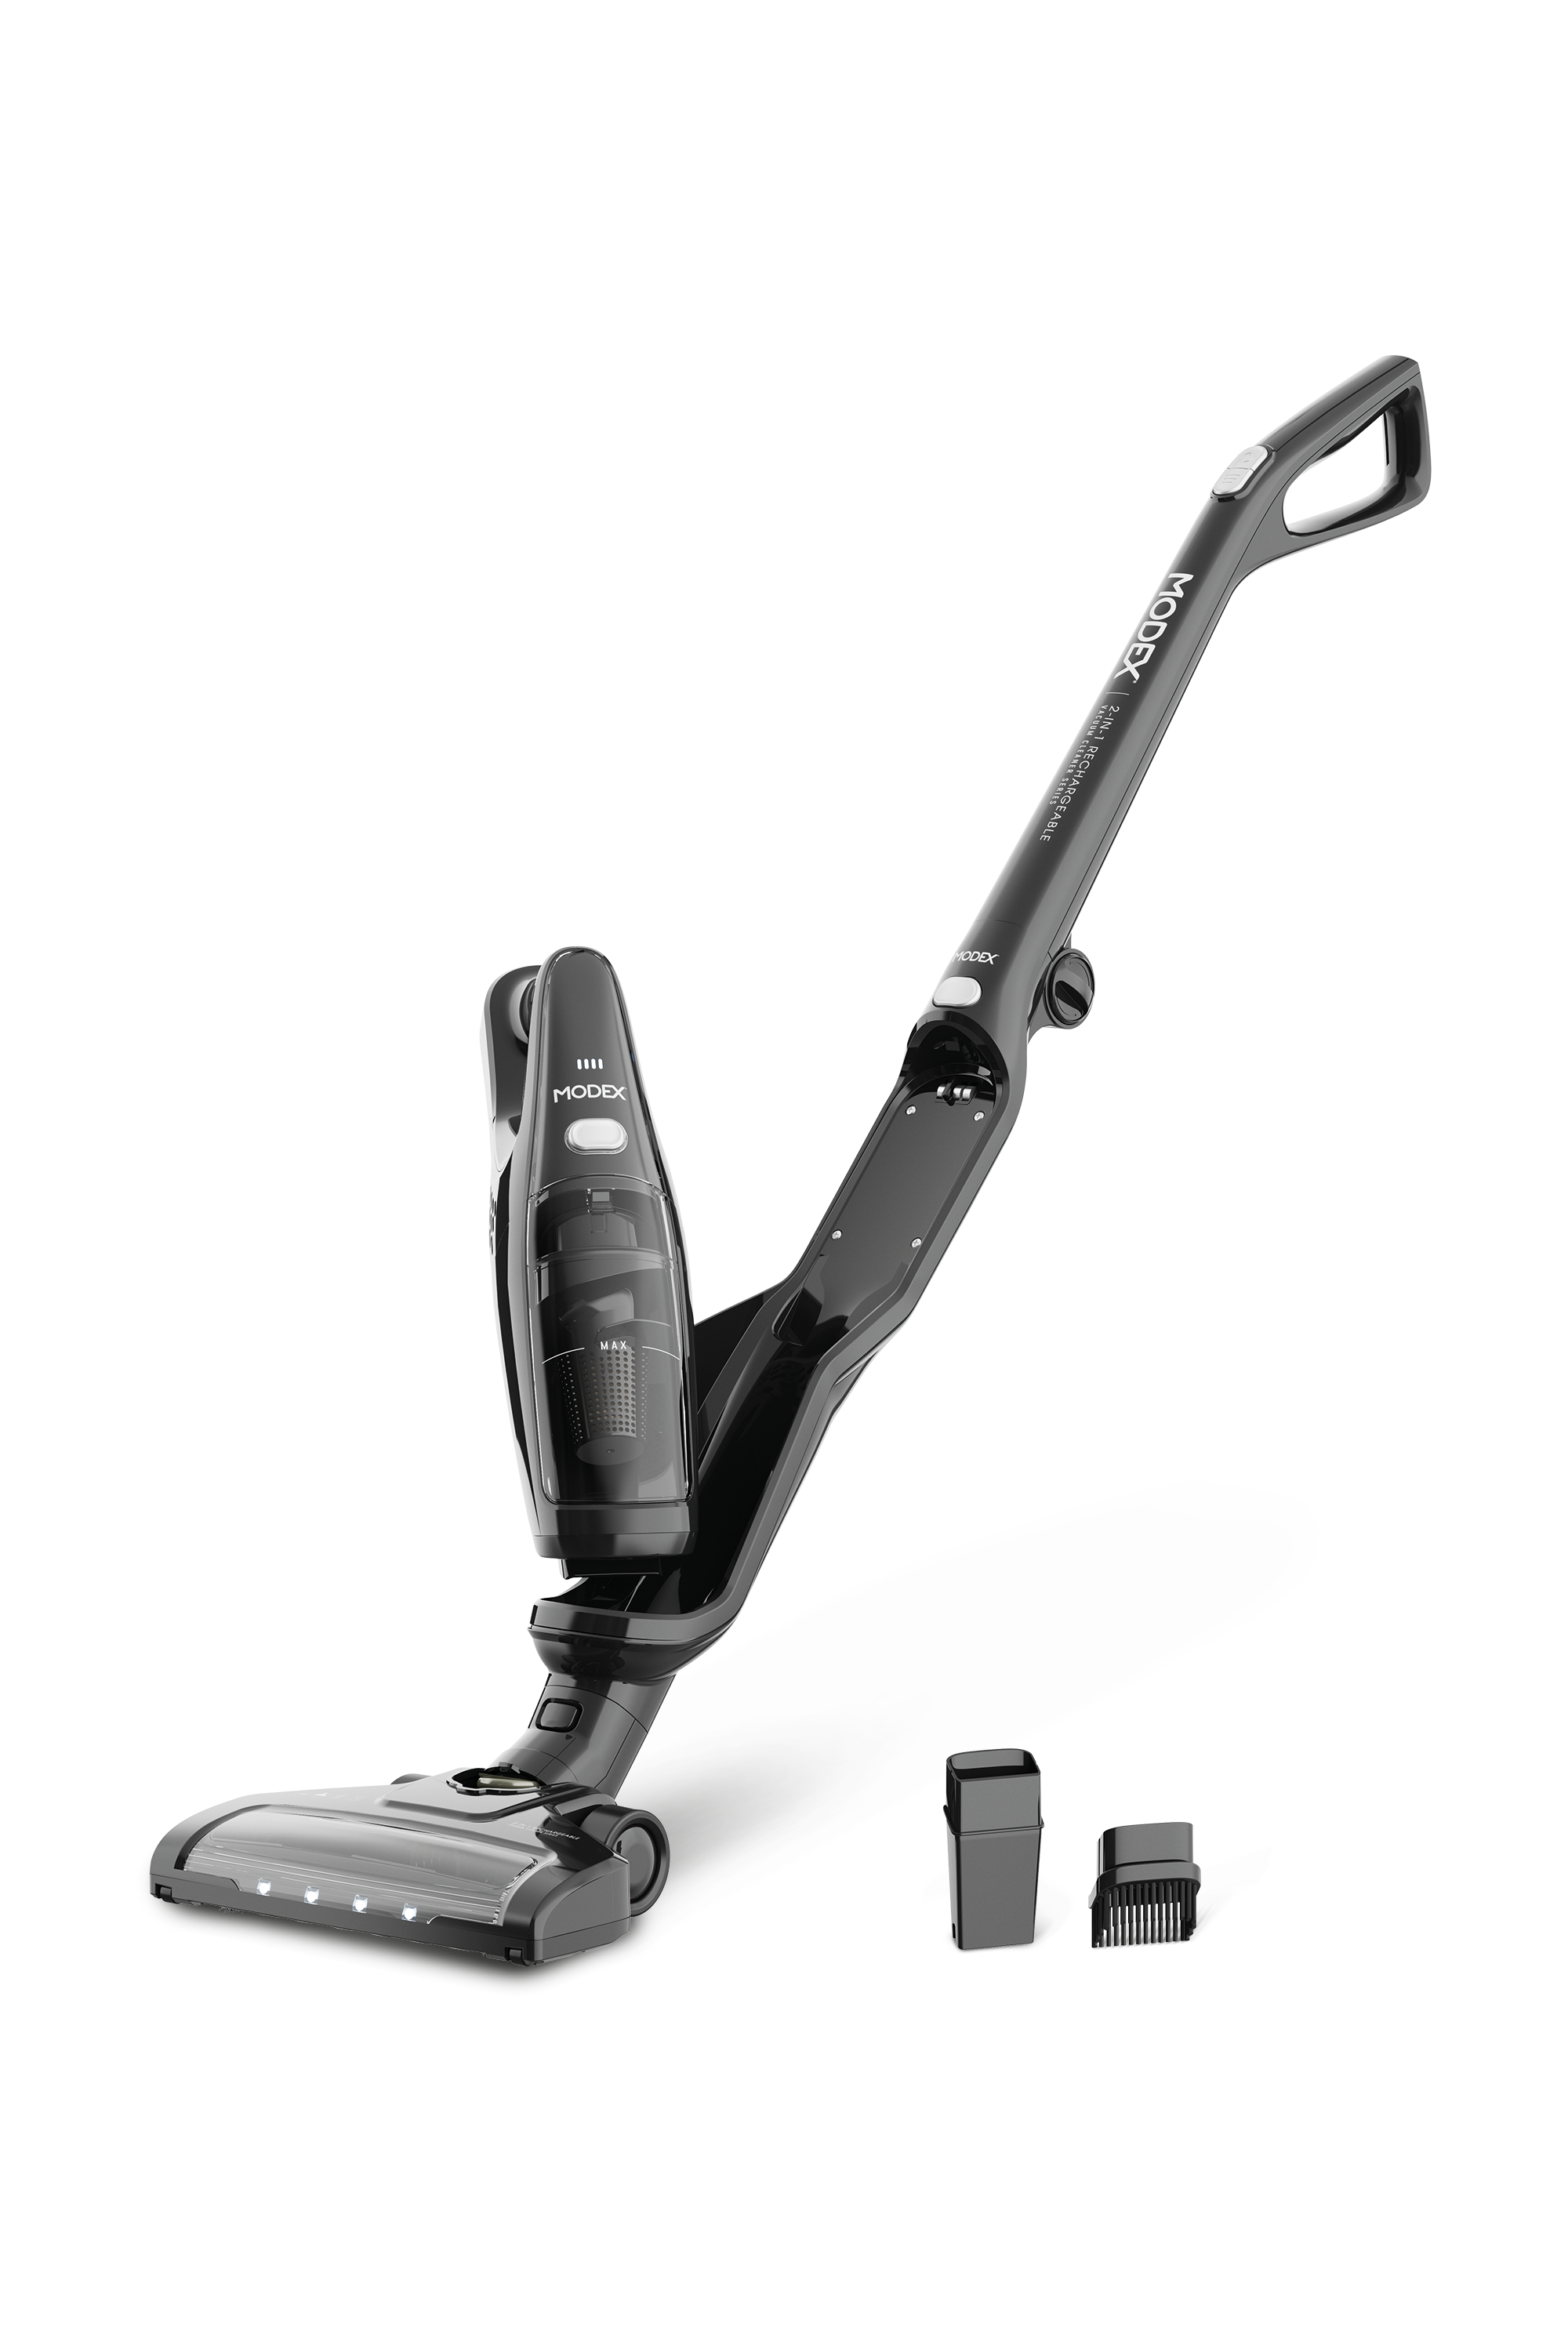 Hvc1300 Chargeable Vacuum Cleaner